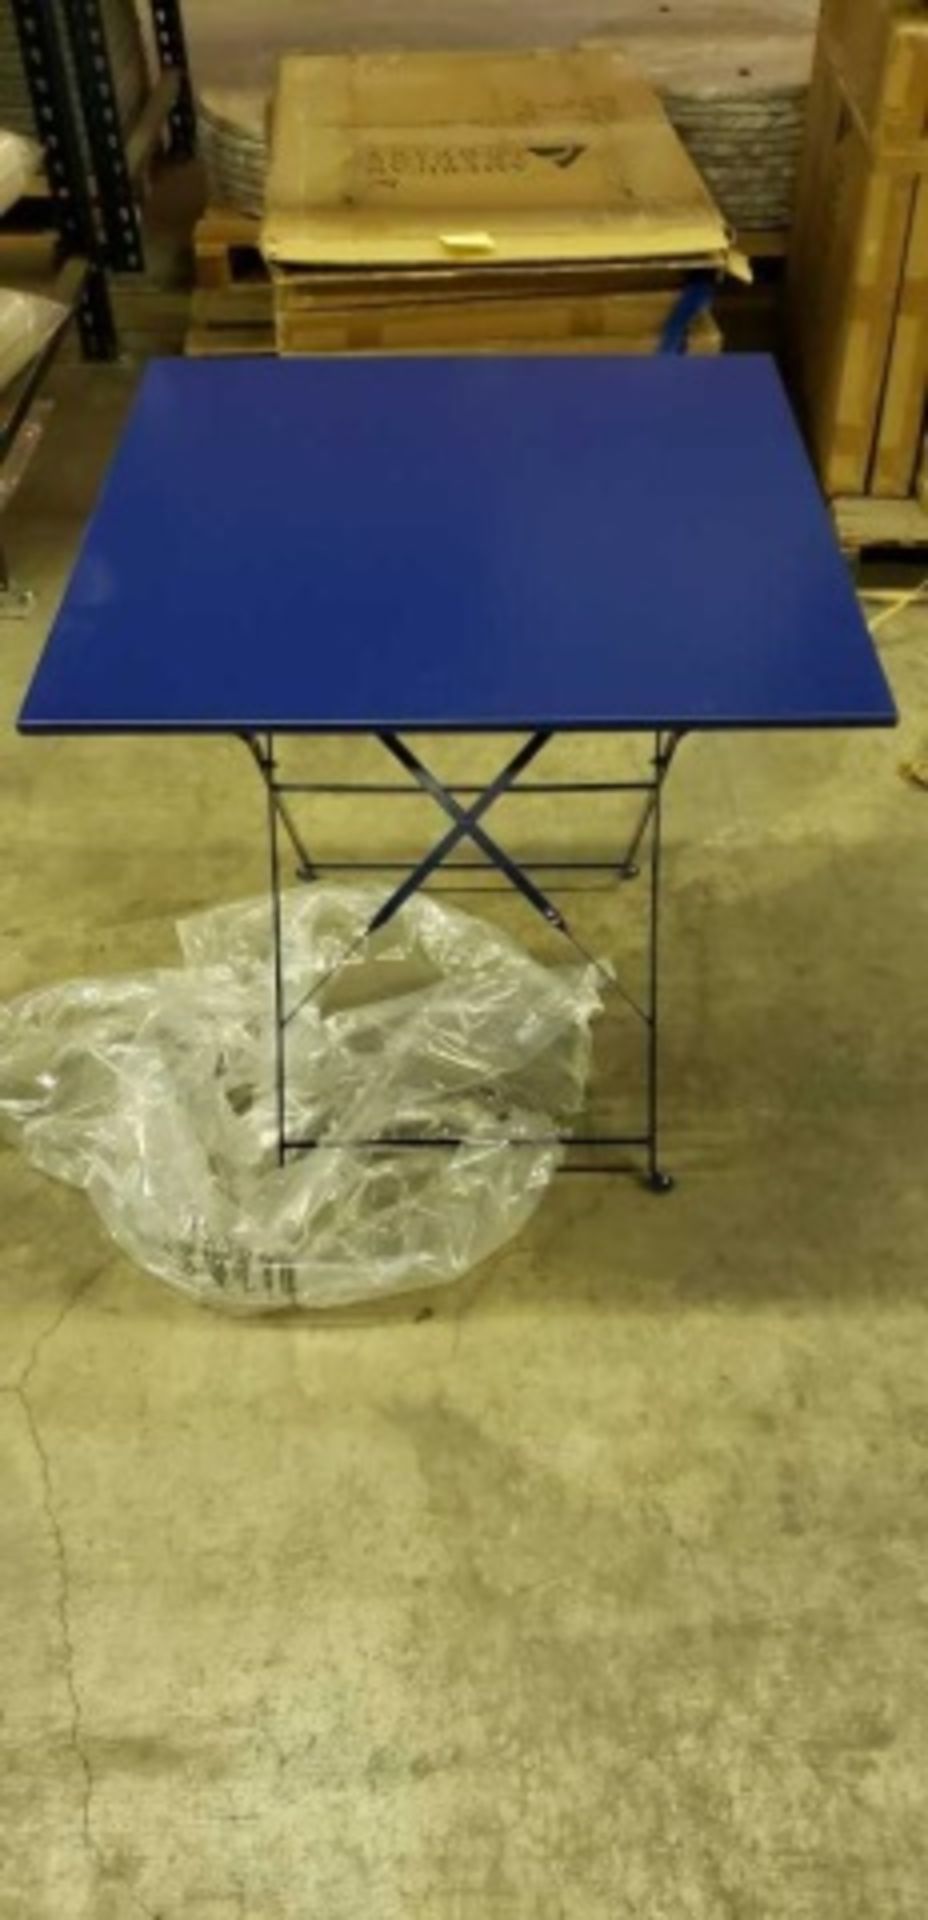 Jardin 28" Square Folding Table - Blue. ElectroZinc treated steel, powder coated. Dimensions: 28" - Image 2 of 6